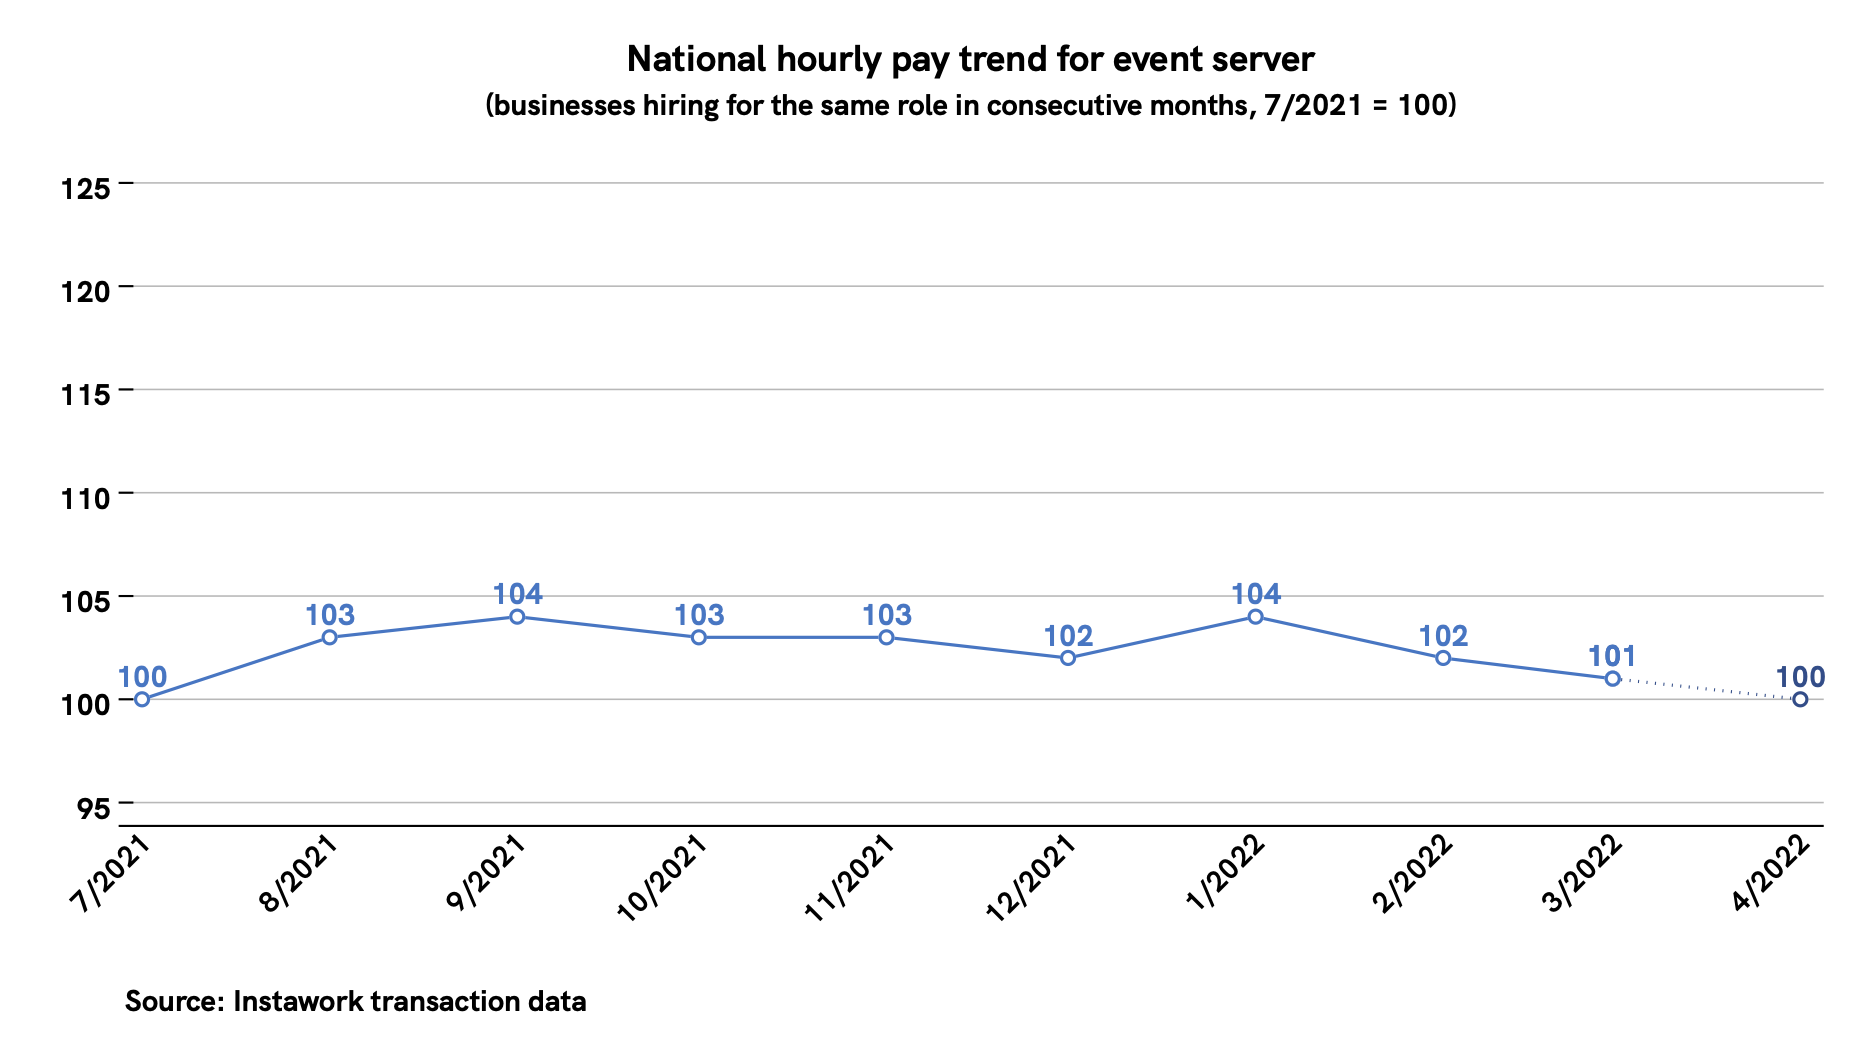 28 Mar 2022 pay trend for event server